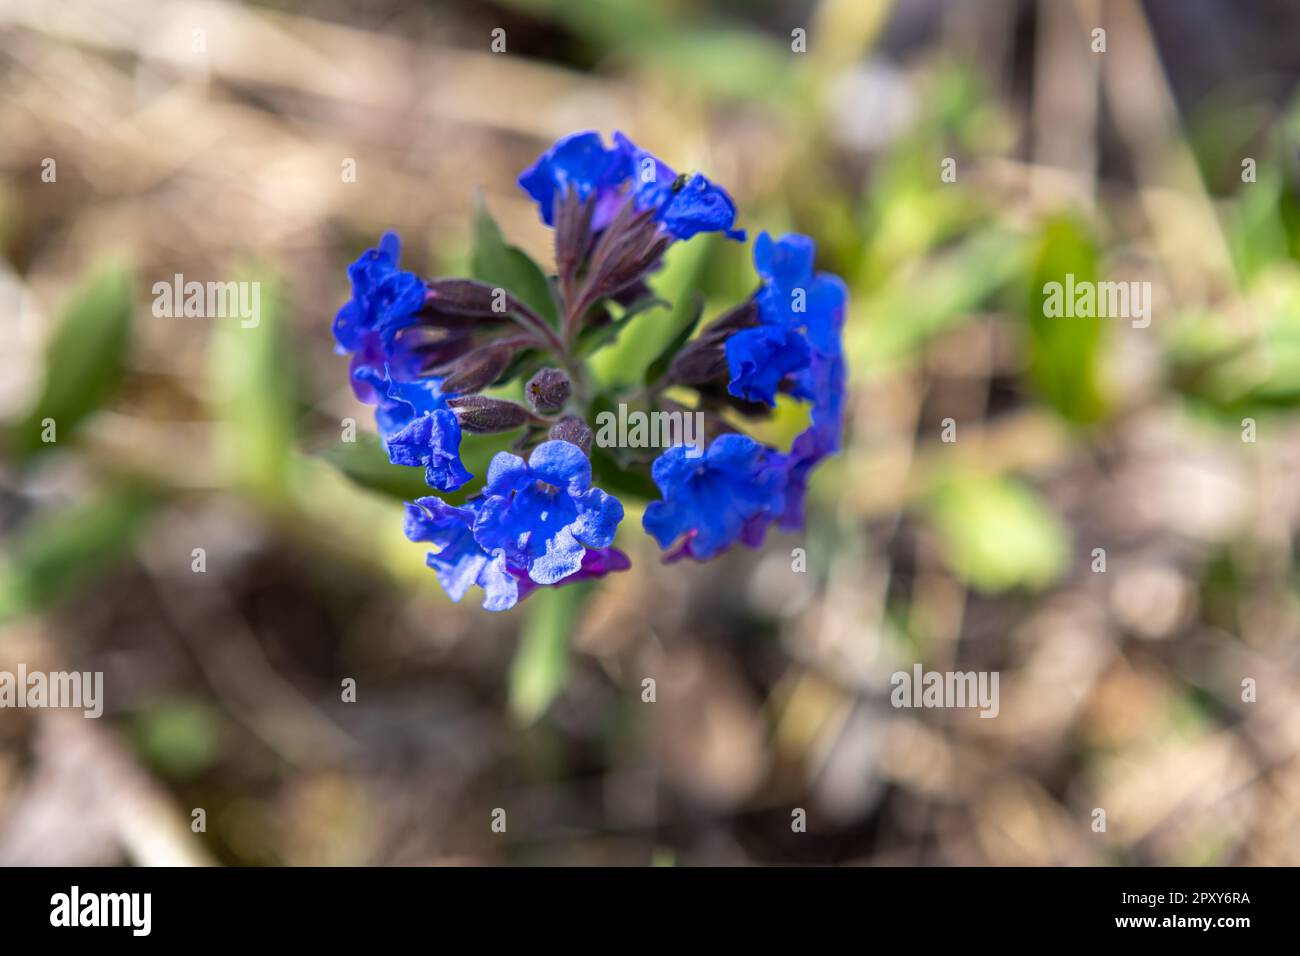 Medunitsa (Pulmonaria officinalis) is a medicinal plant in the Boraginaceae family. The plant is used in alternative medicine. Beautiful blue flowers. Stock Photo